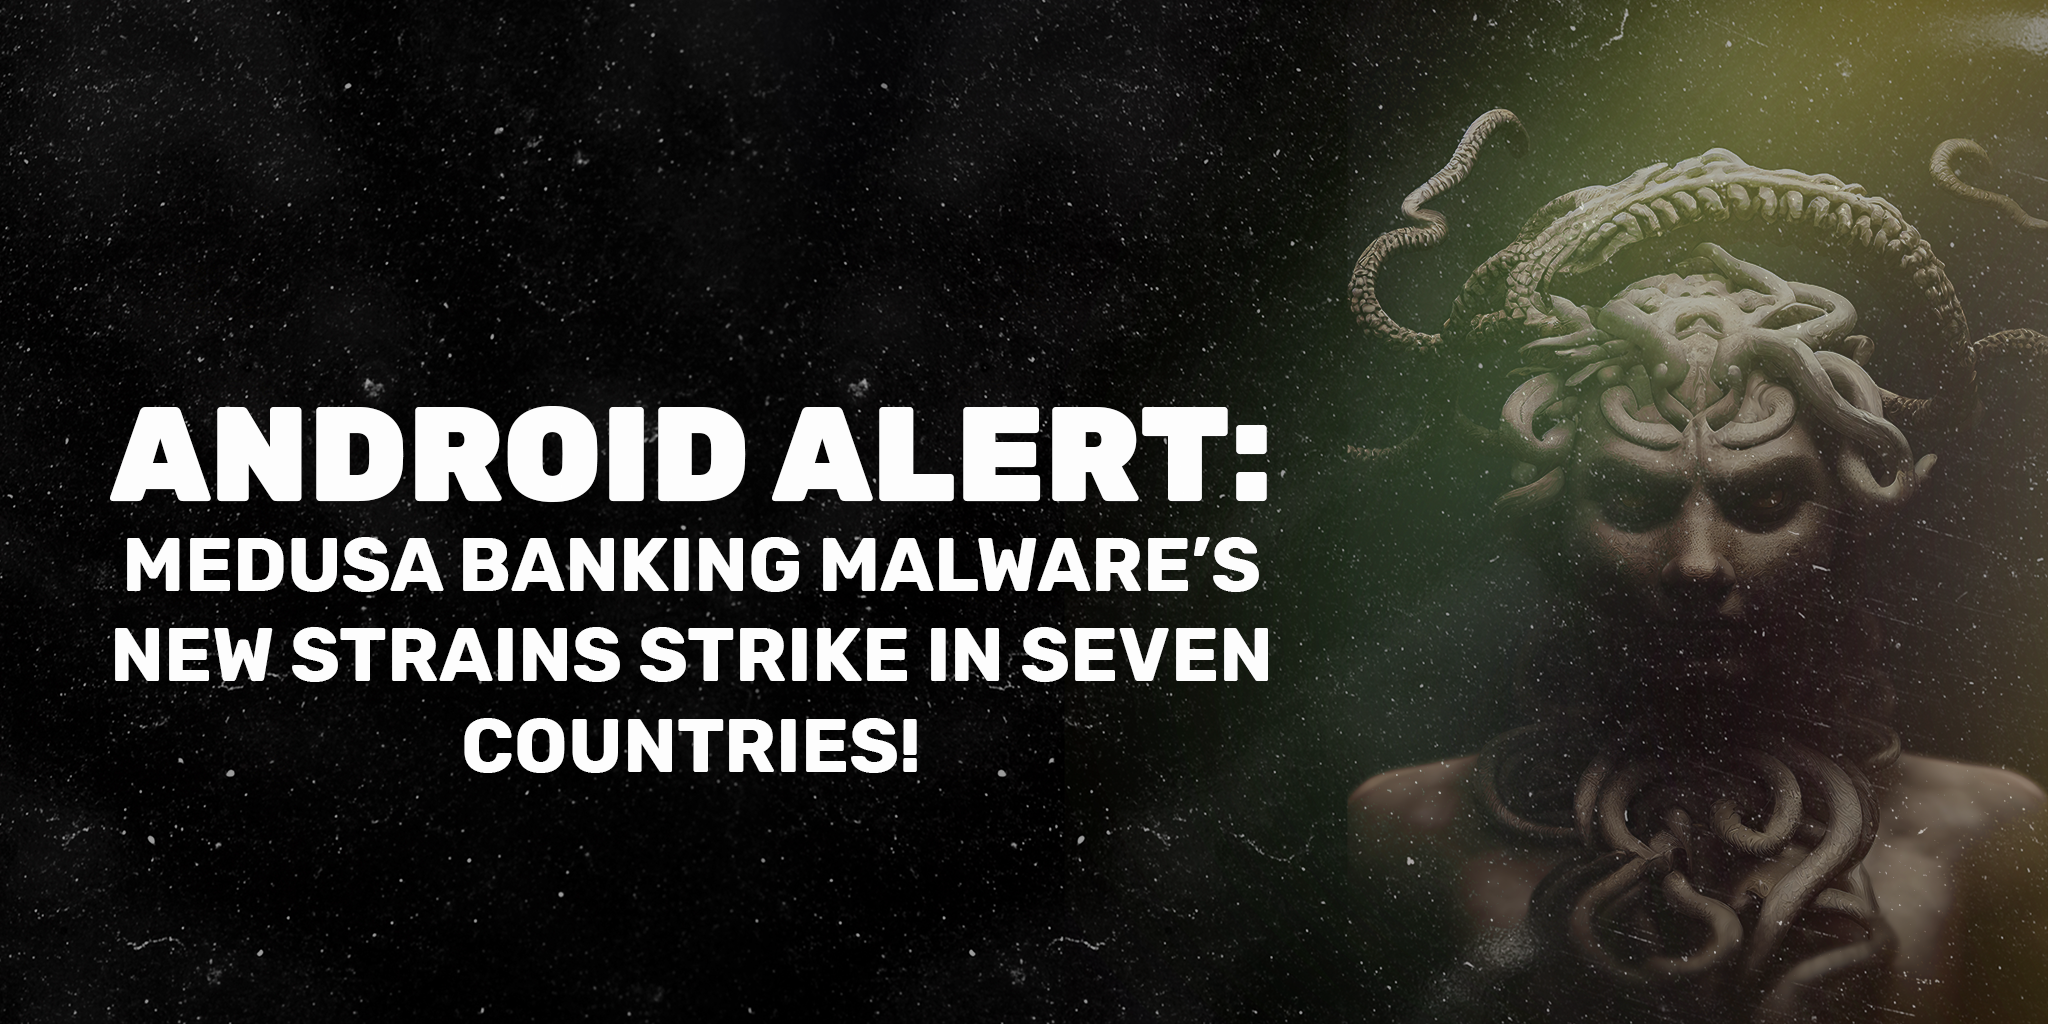 Android Alert: Medusa Banking Malware’s New Strains Strike in Seven Countries!